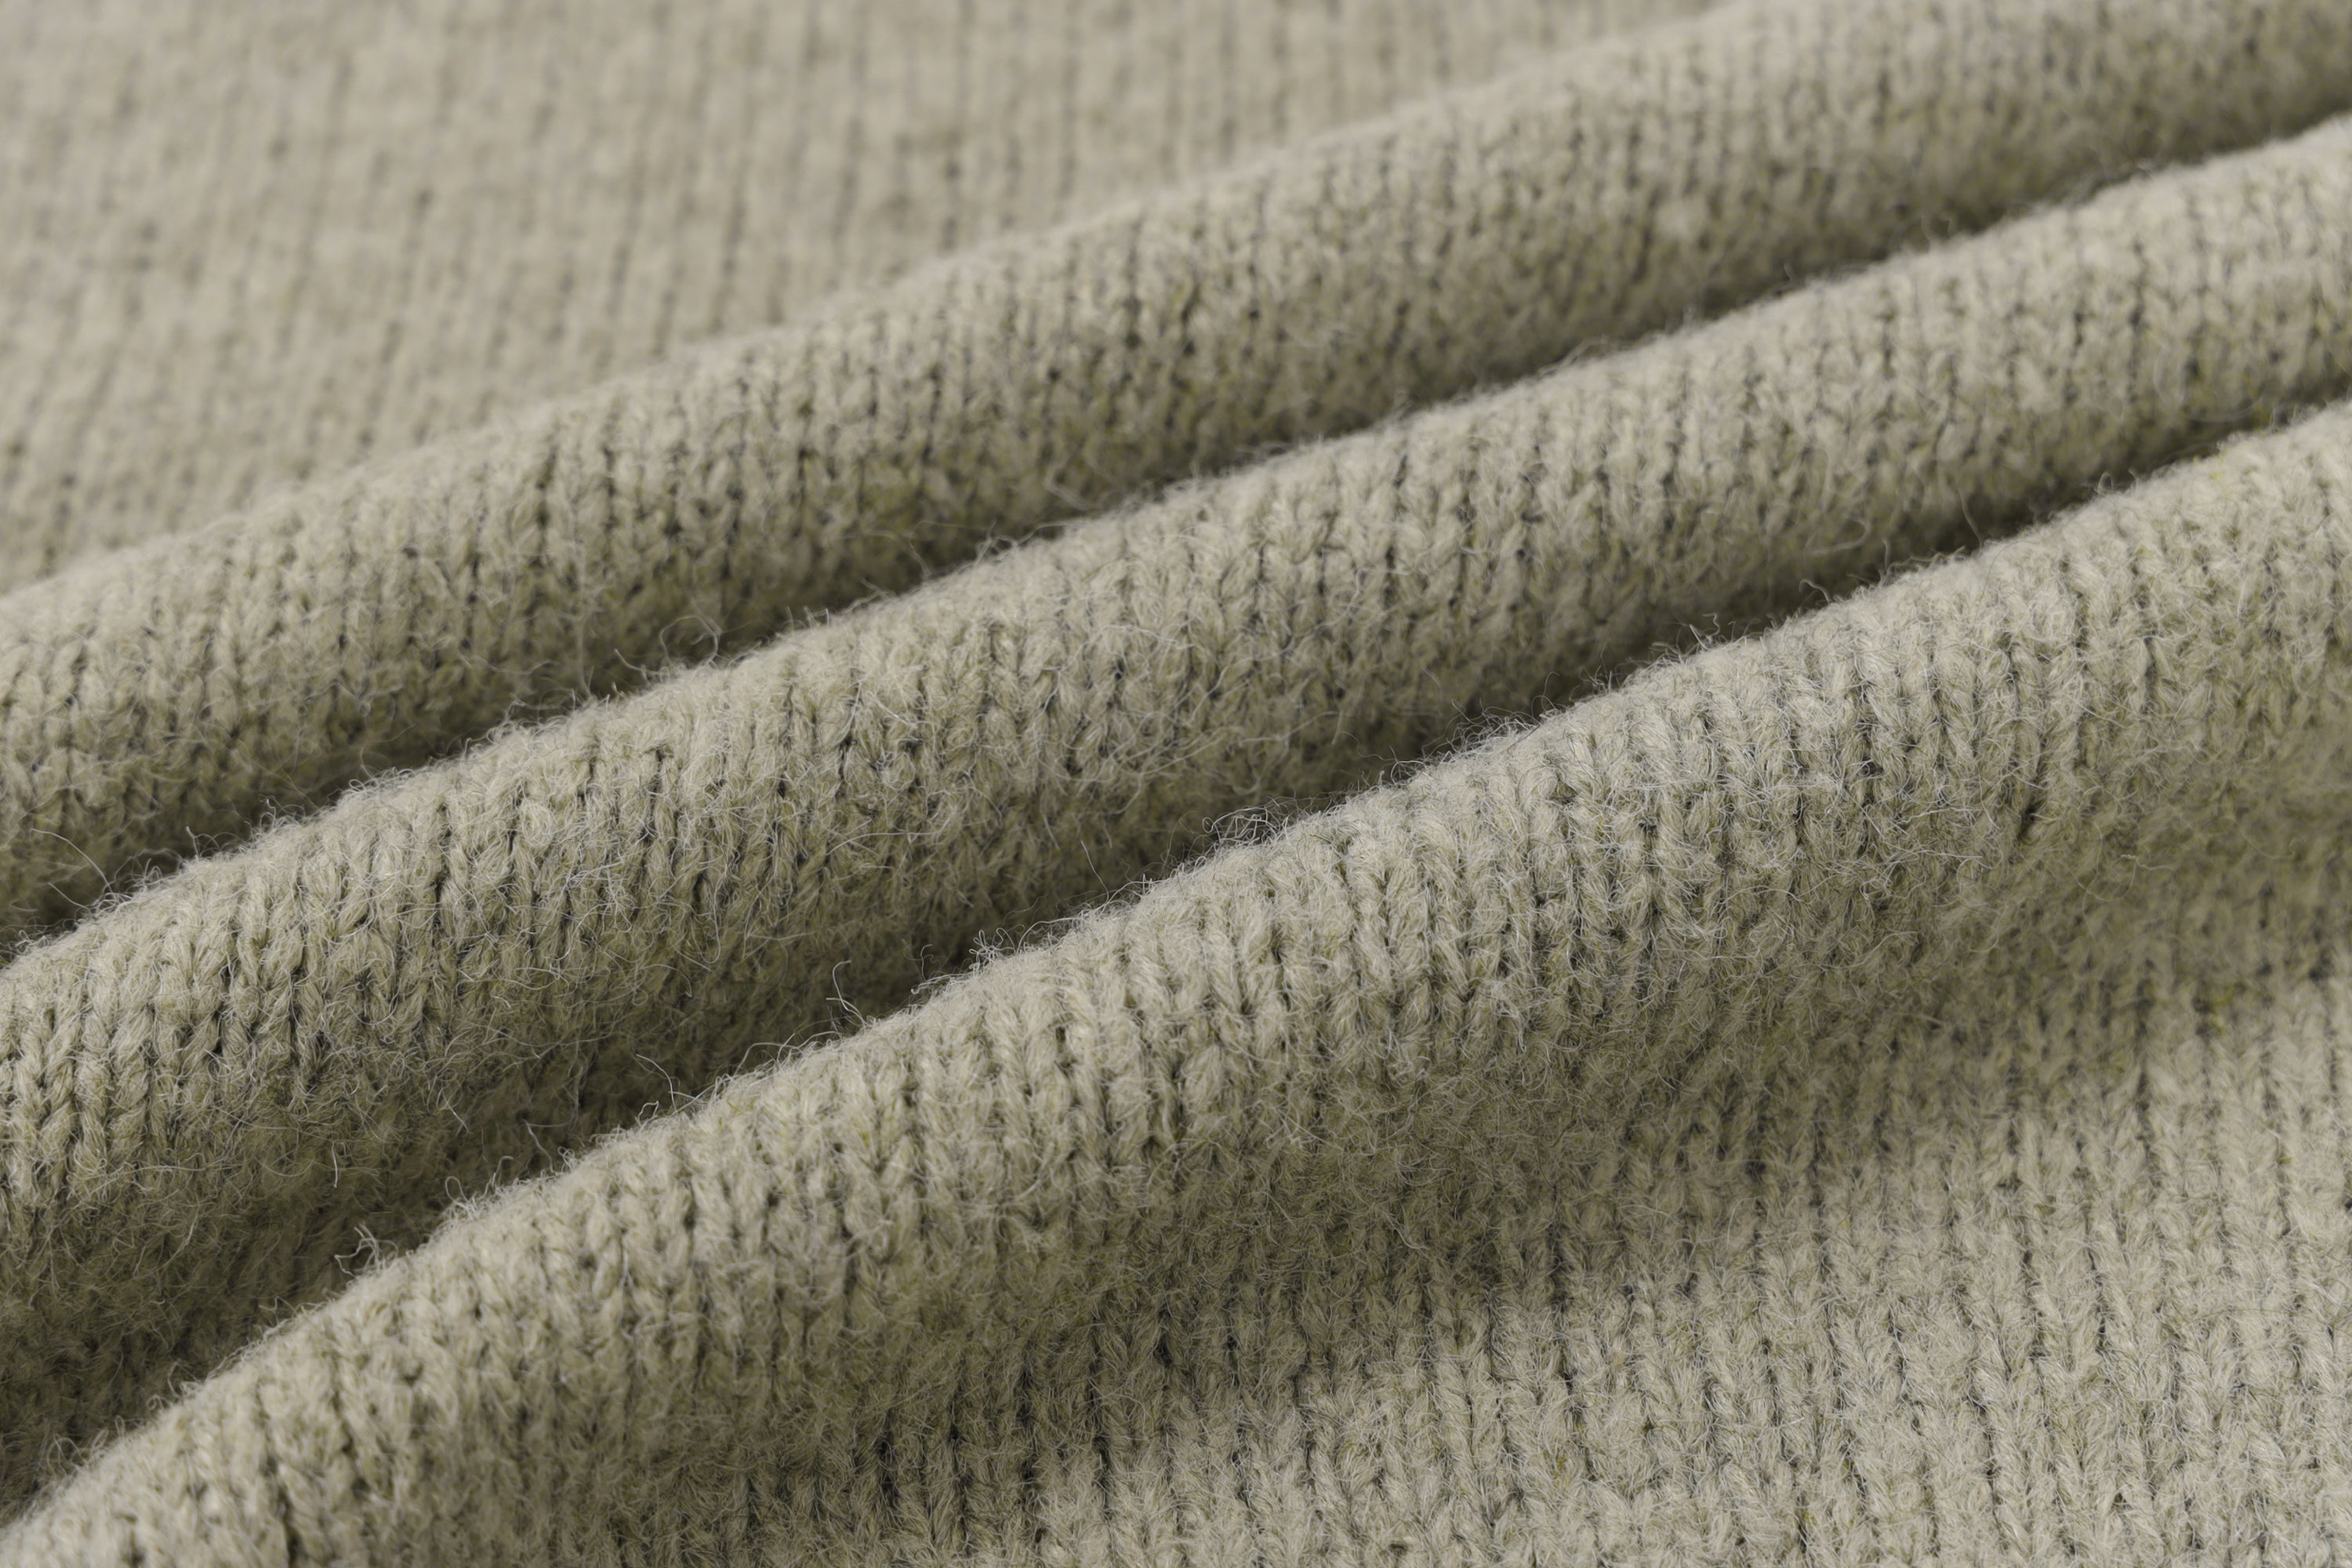 Heavy Turtle Neck Knit In Olive